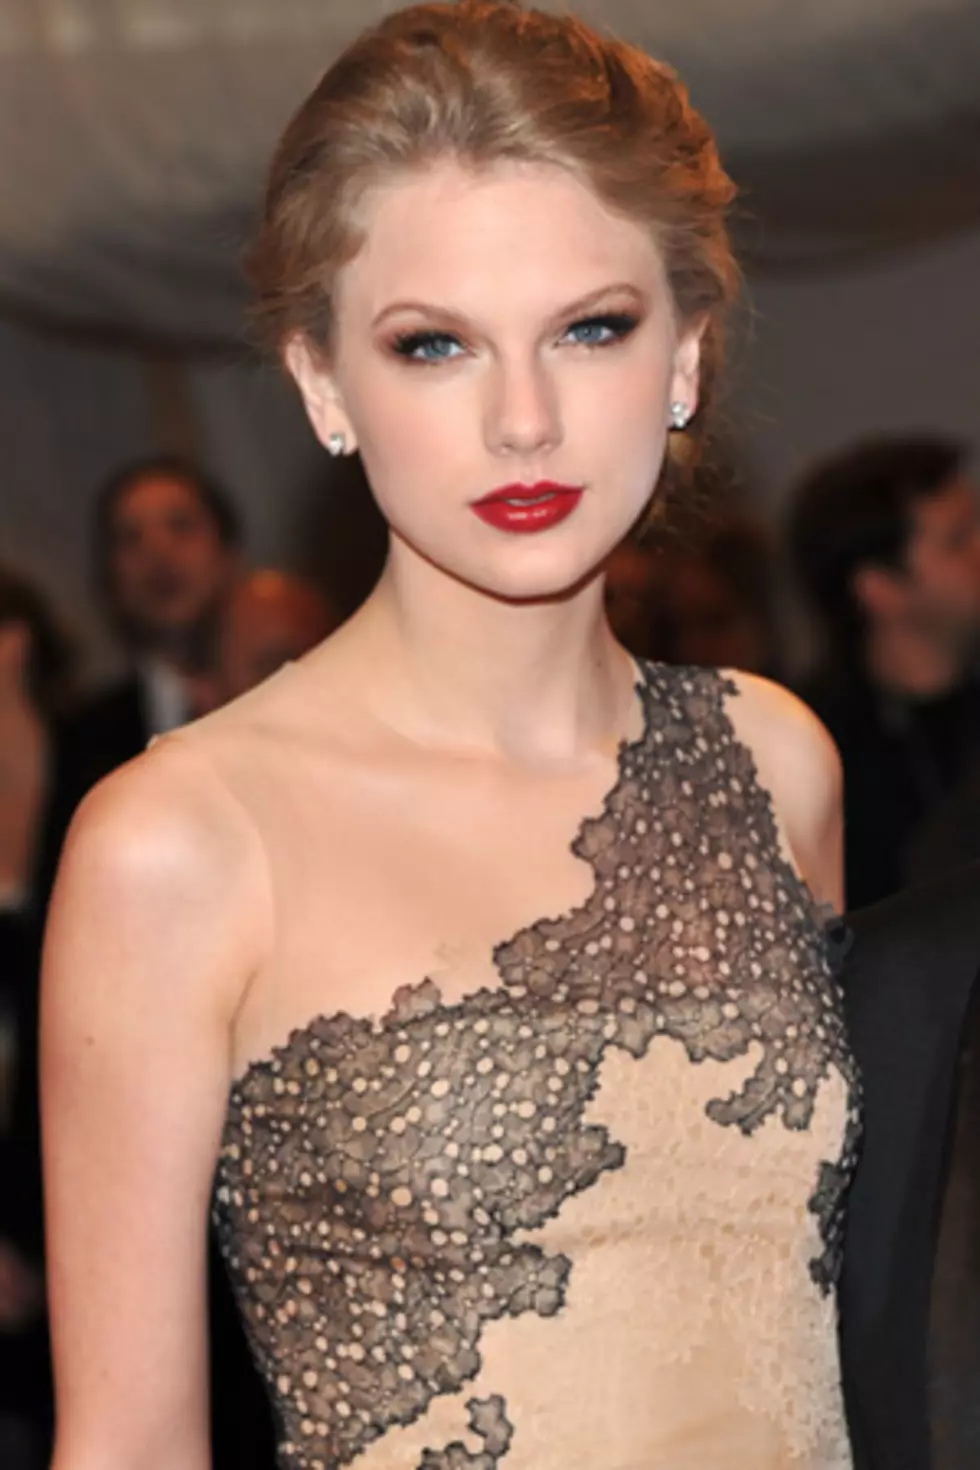 Taylor Swift, &#8216;Mean&#8217; &#8211; Lyrics Uncovered